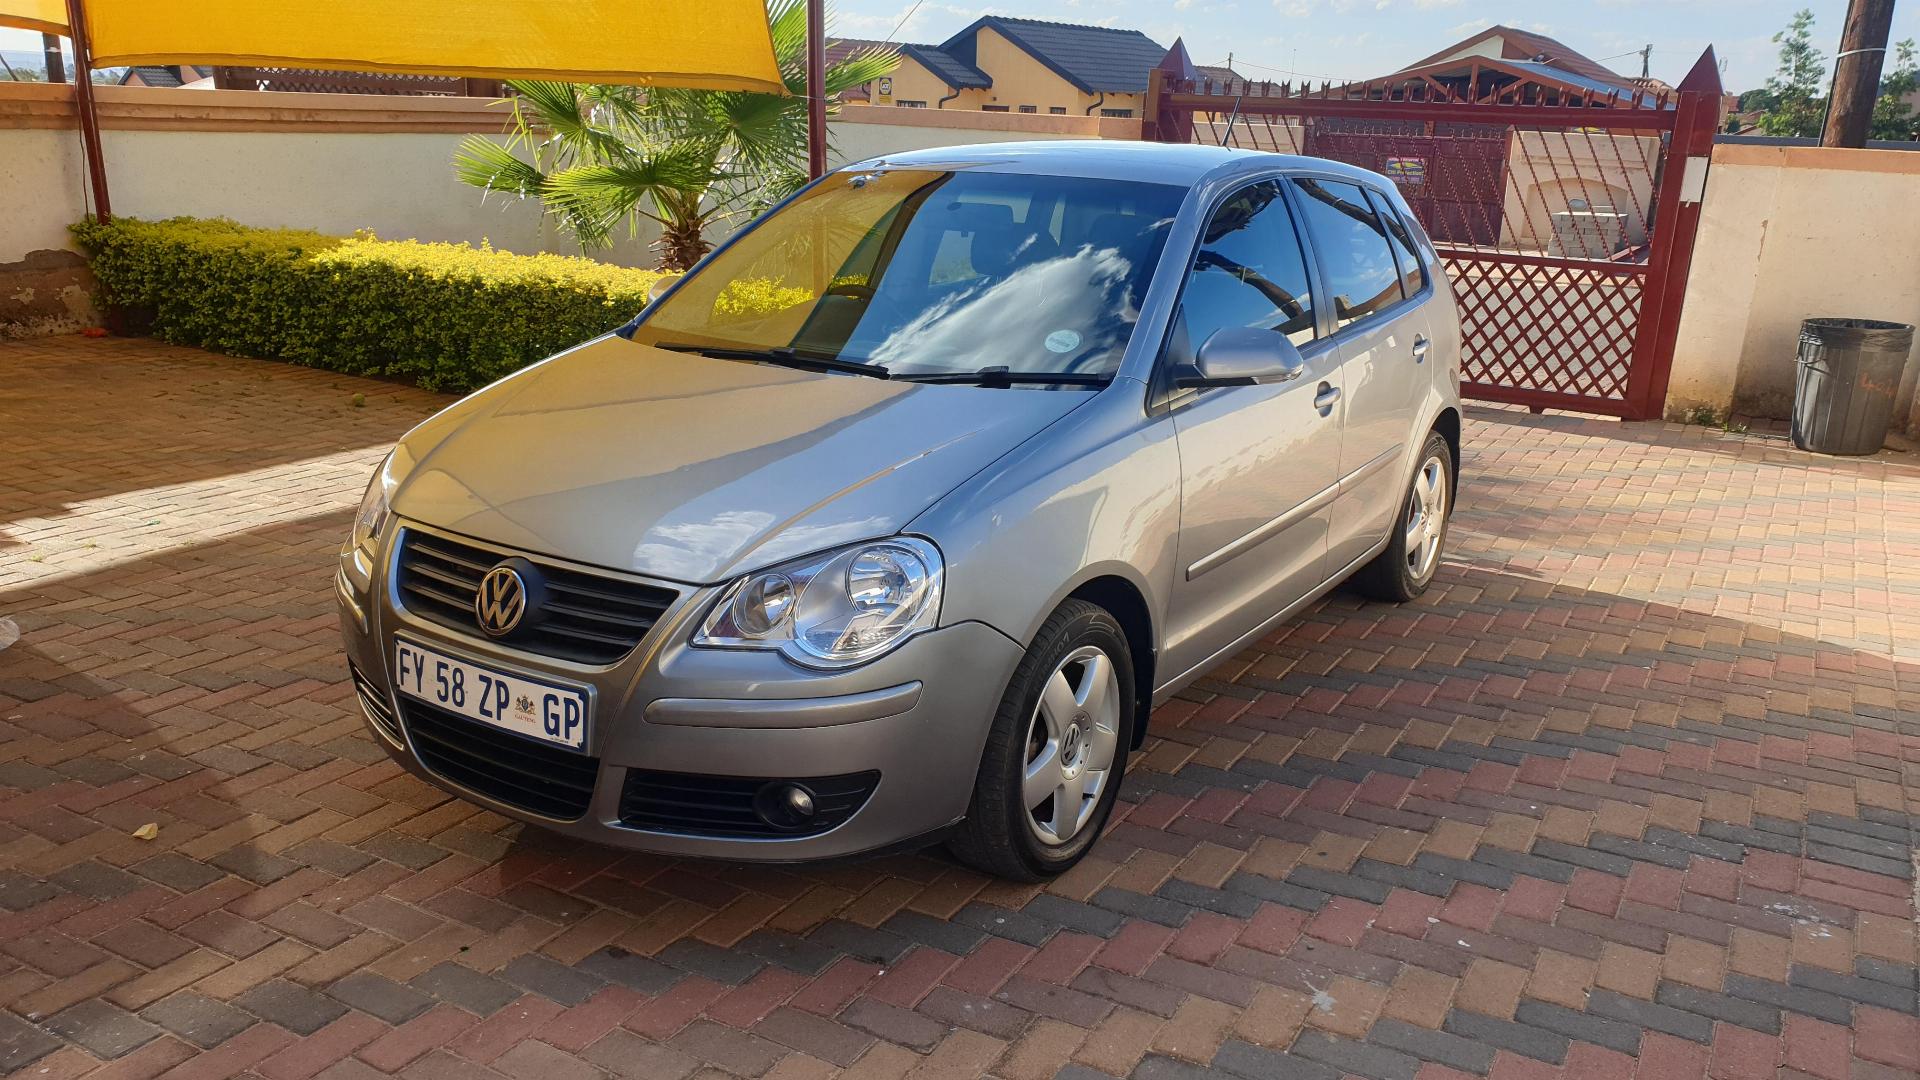 Used Volkswagen Polo 1.9TDI Comfortline 2004 on auction